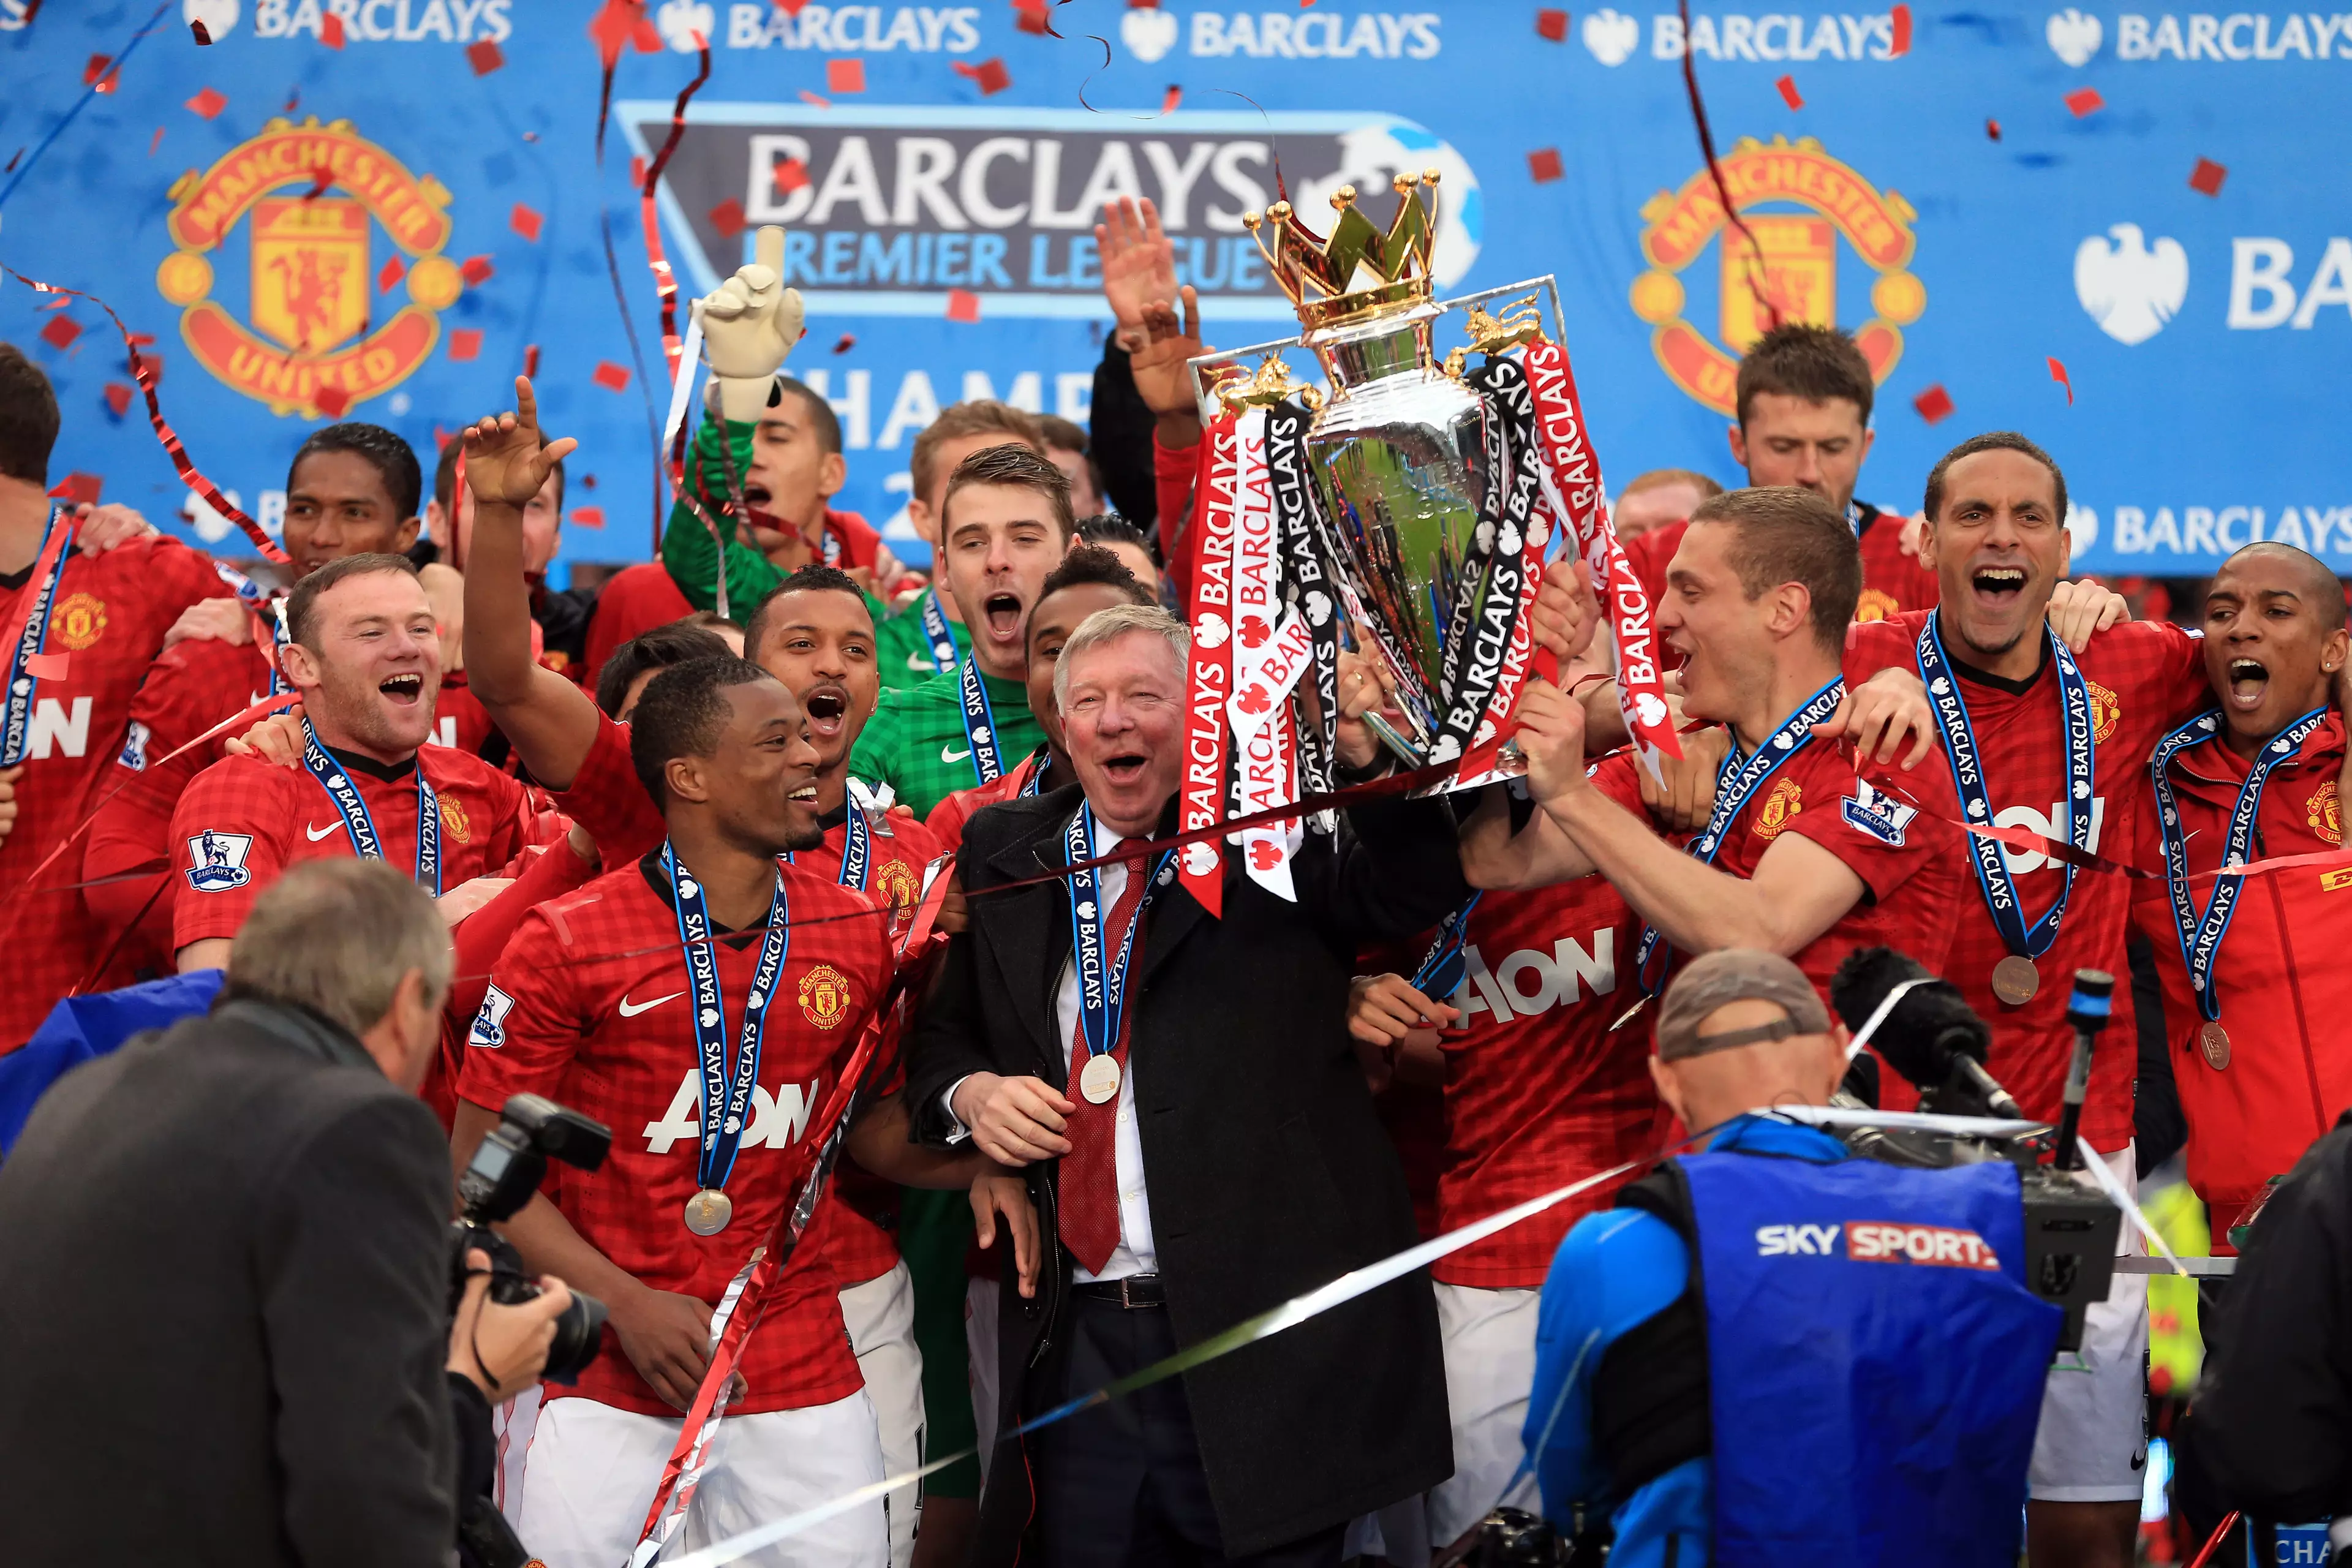 Manchester United's Premier League title in 2013 was 'Fergie's' final trophy before retiring. Image: PA Images